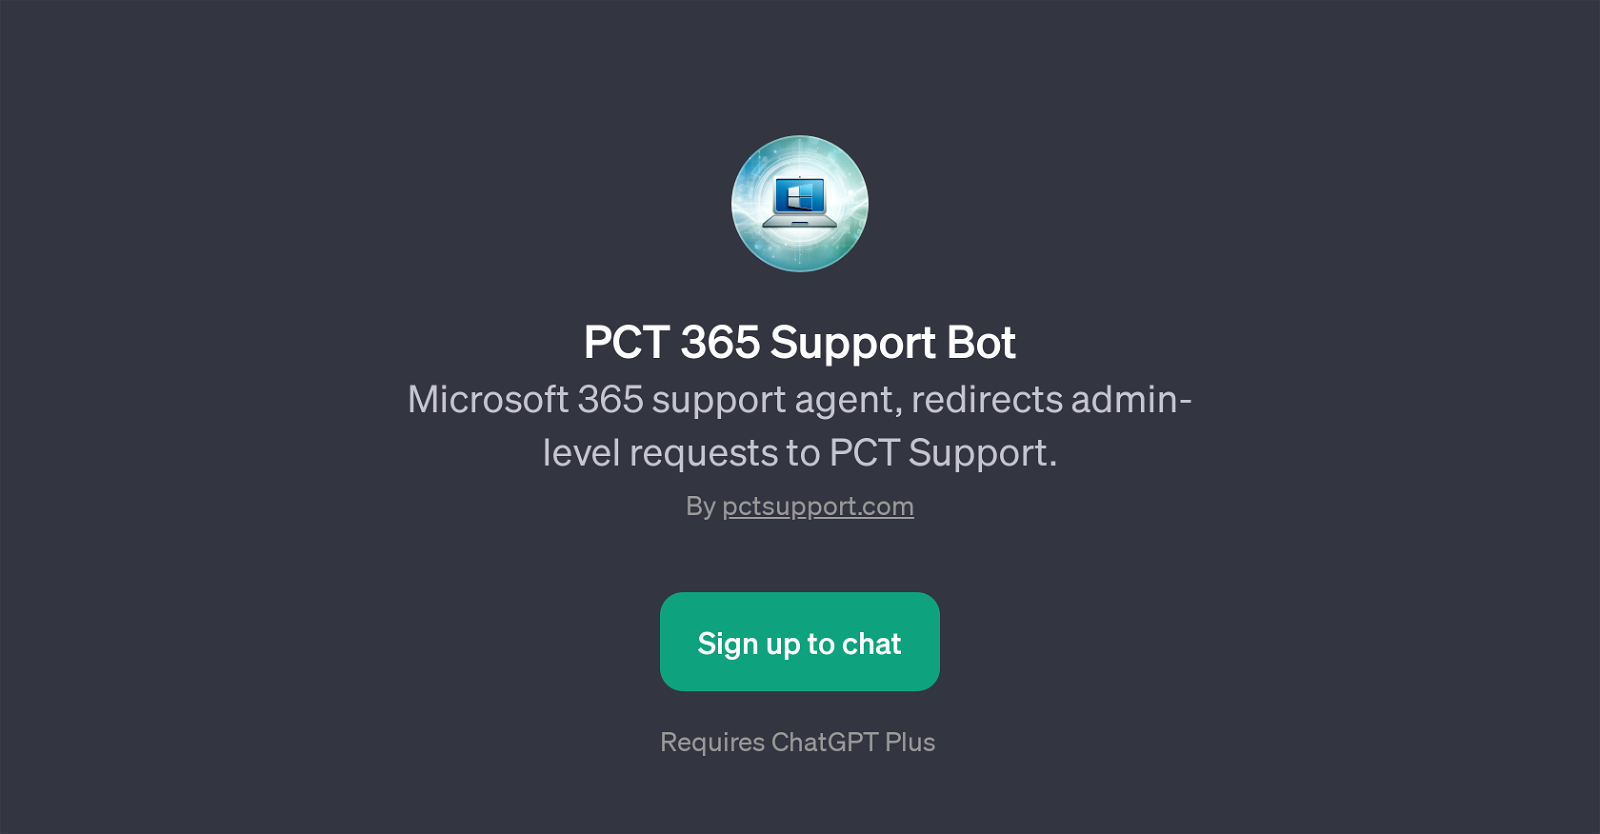 PCT 365 Support Bot website